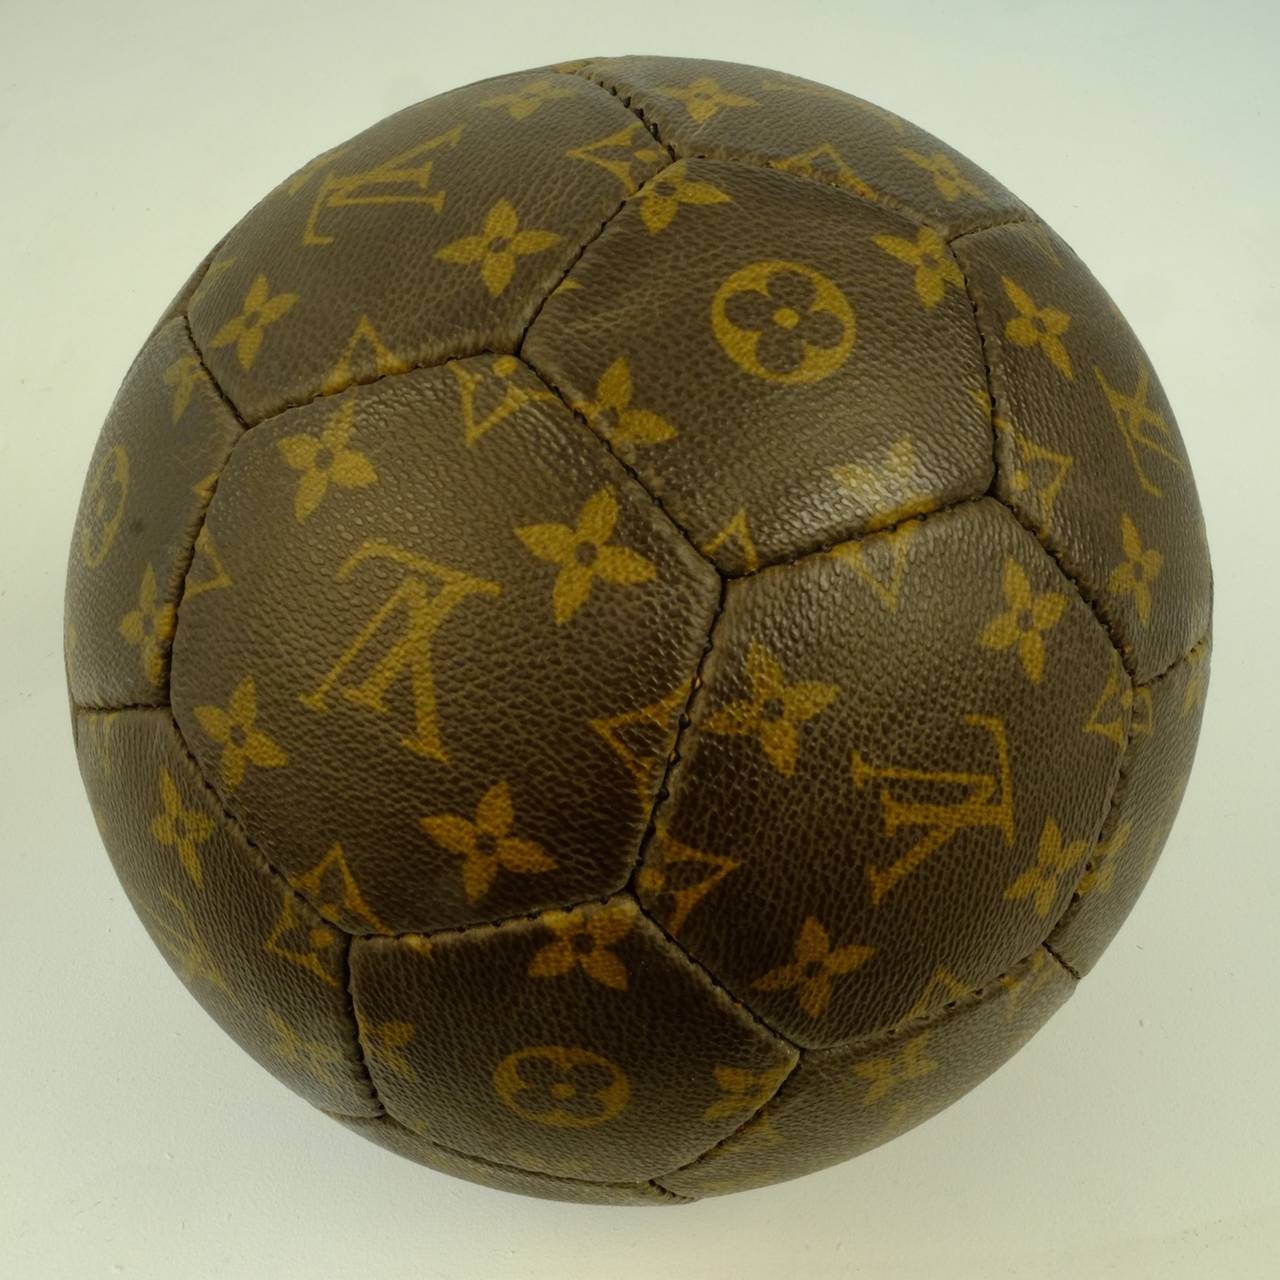 Louis Vuitton soccer ball made for the World cup in France in 1998 in a limited edition about 3000 pieces, as present for artists, celebrities and politicians. Great collectible or decorative item. The ball comes with a dustbag and a Photography